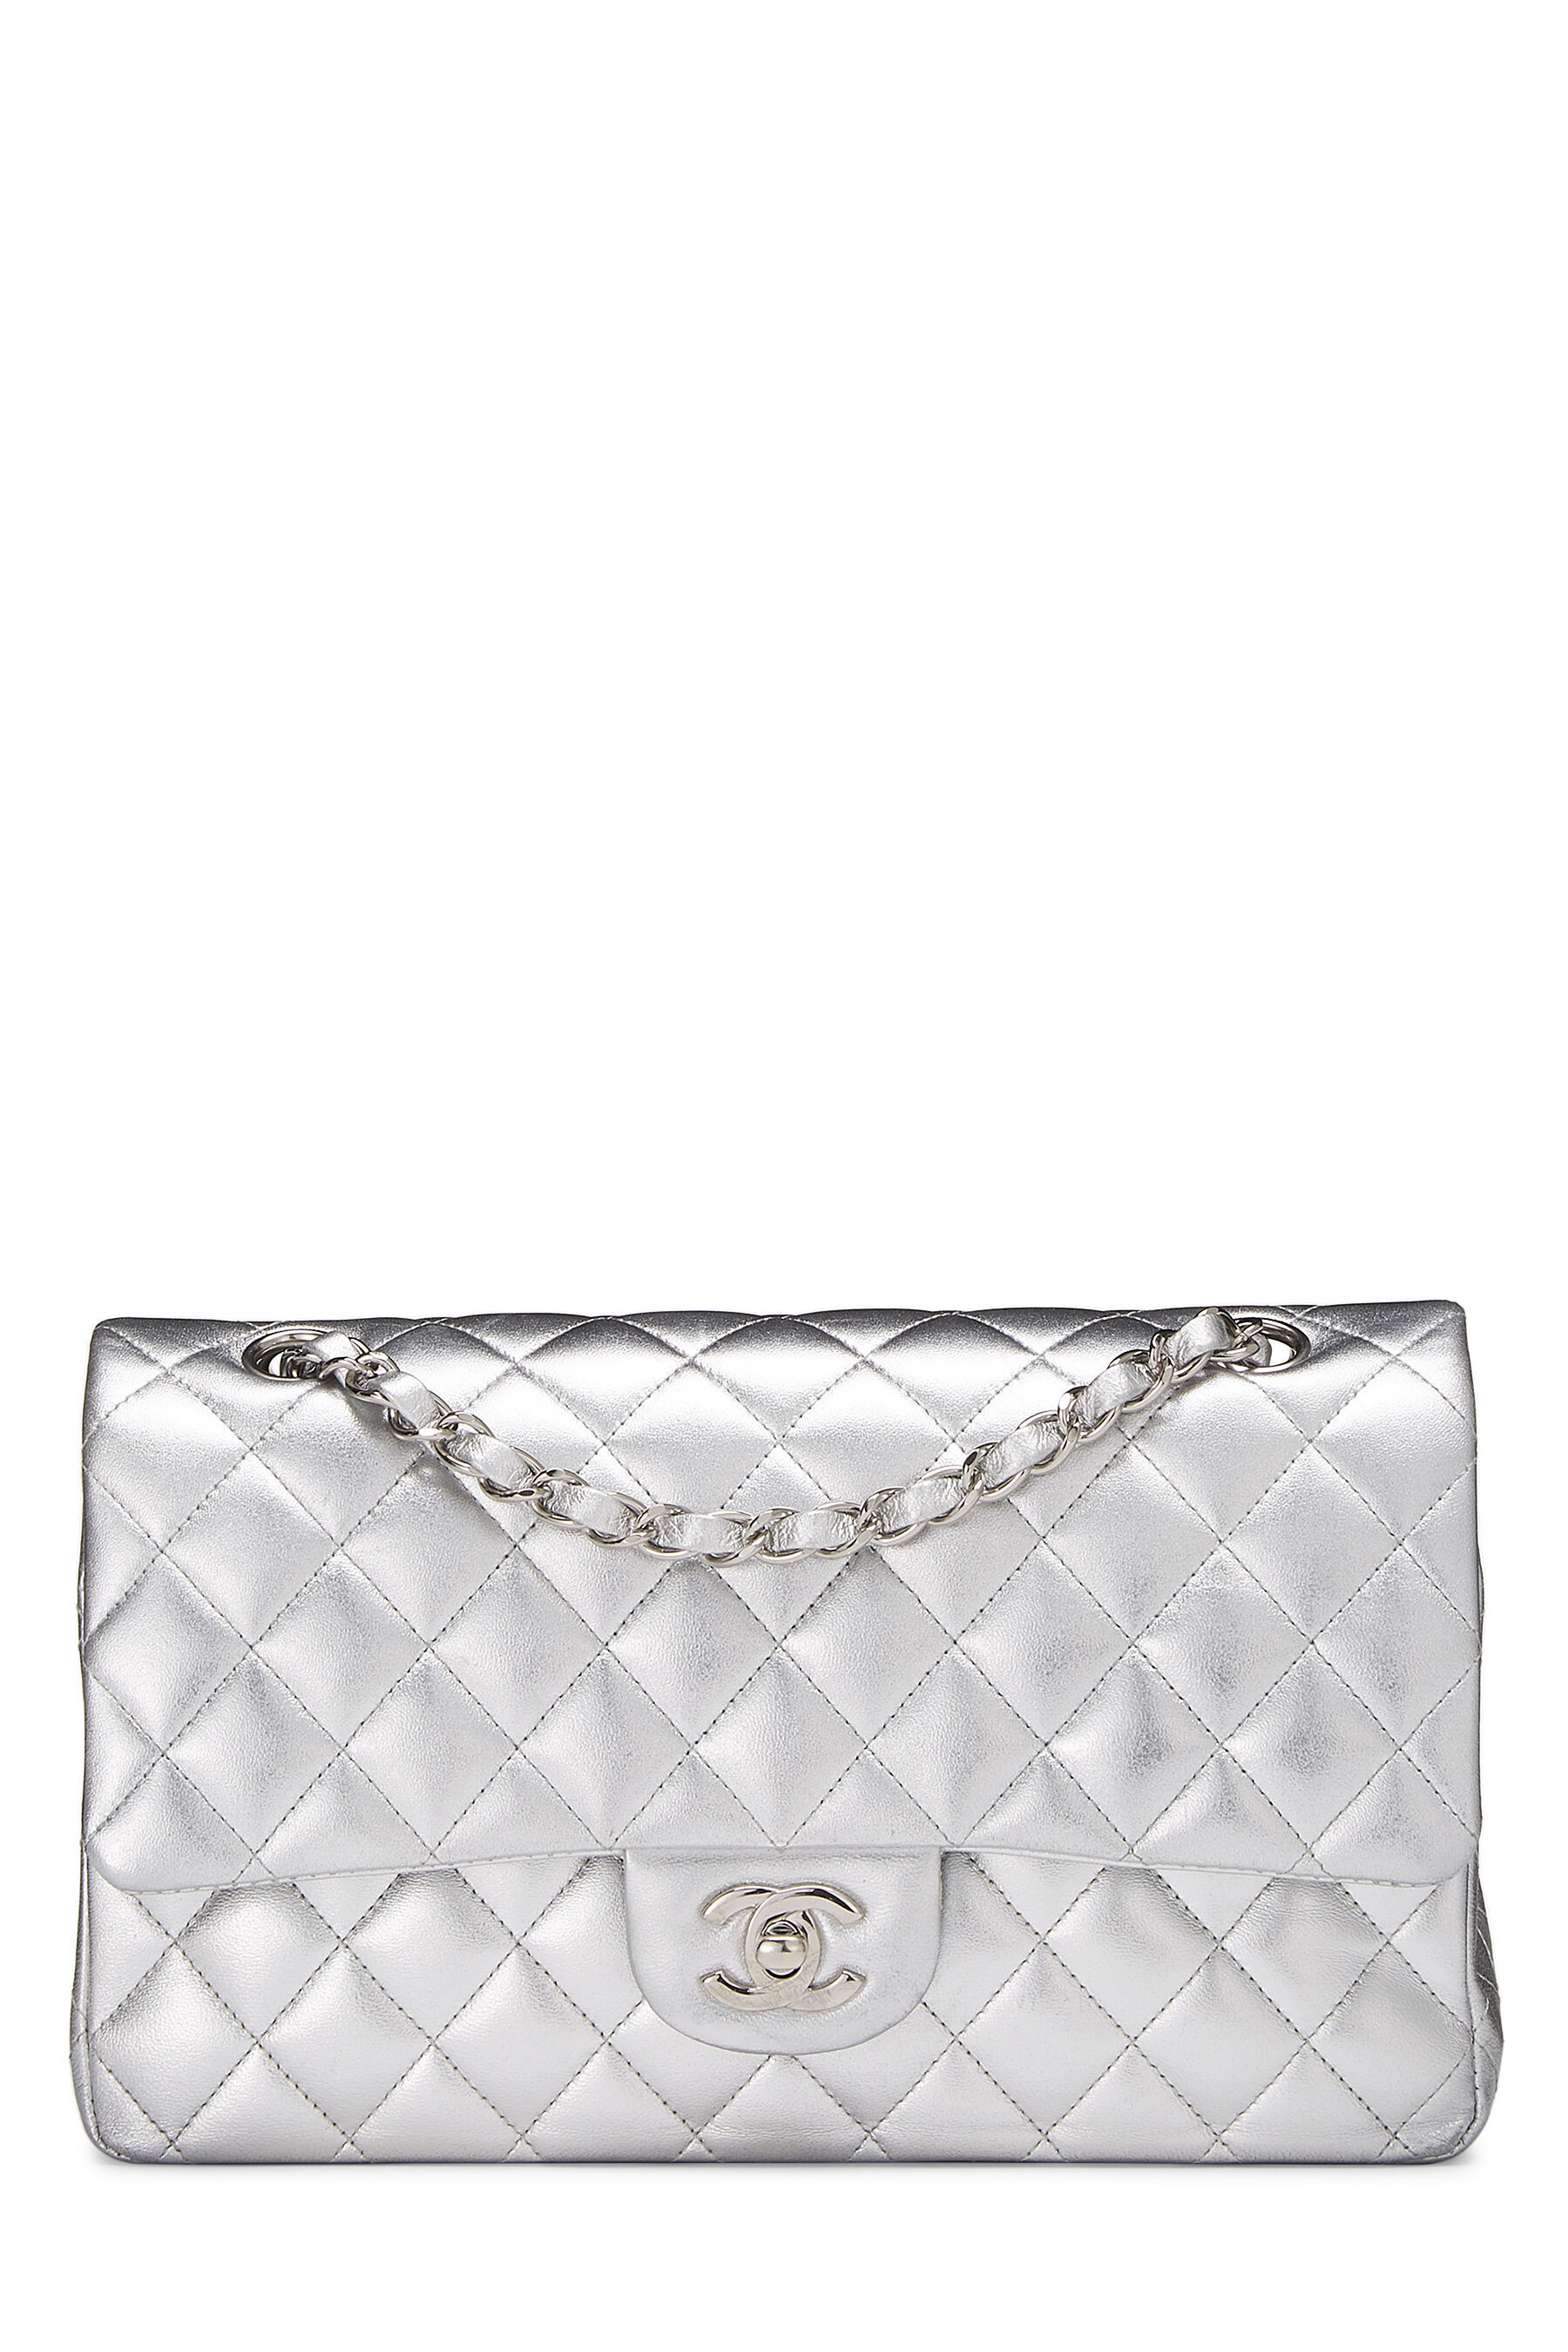 Chanel Classic Flap Cc Laser Cut Metallic Silver Leather Shoulder Bag For  Sale at 1stDibs  cc cut silver chanel bag chanel silver bag